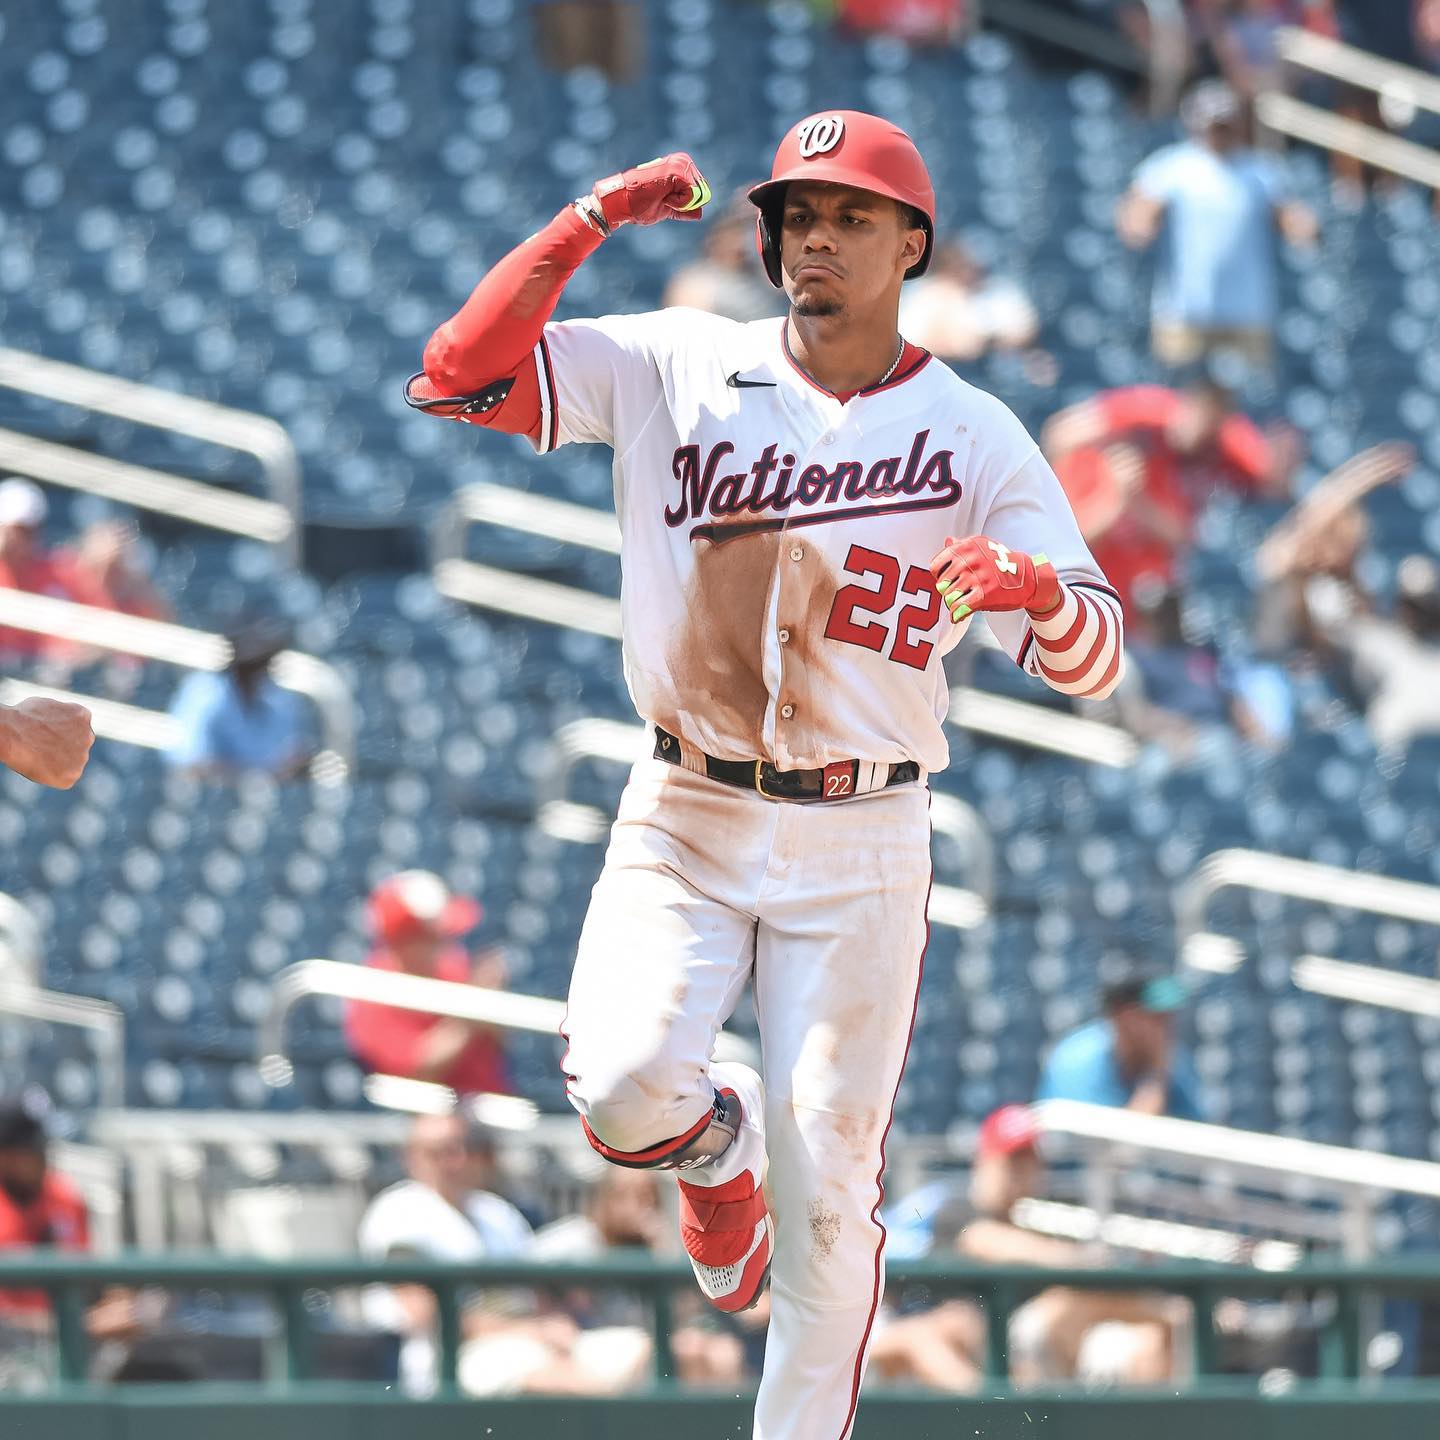 We post every Juan Soto HR no matter what....